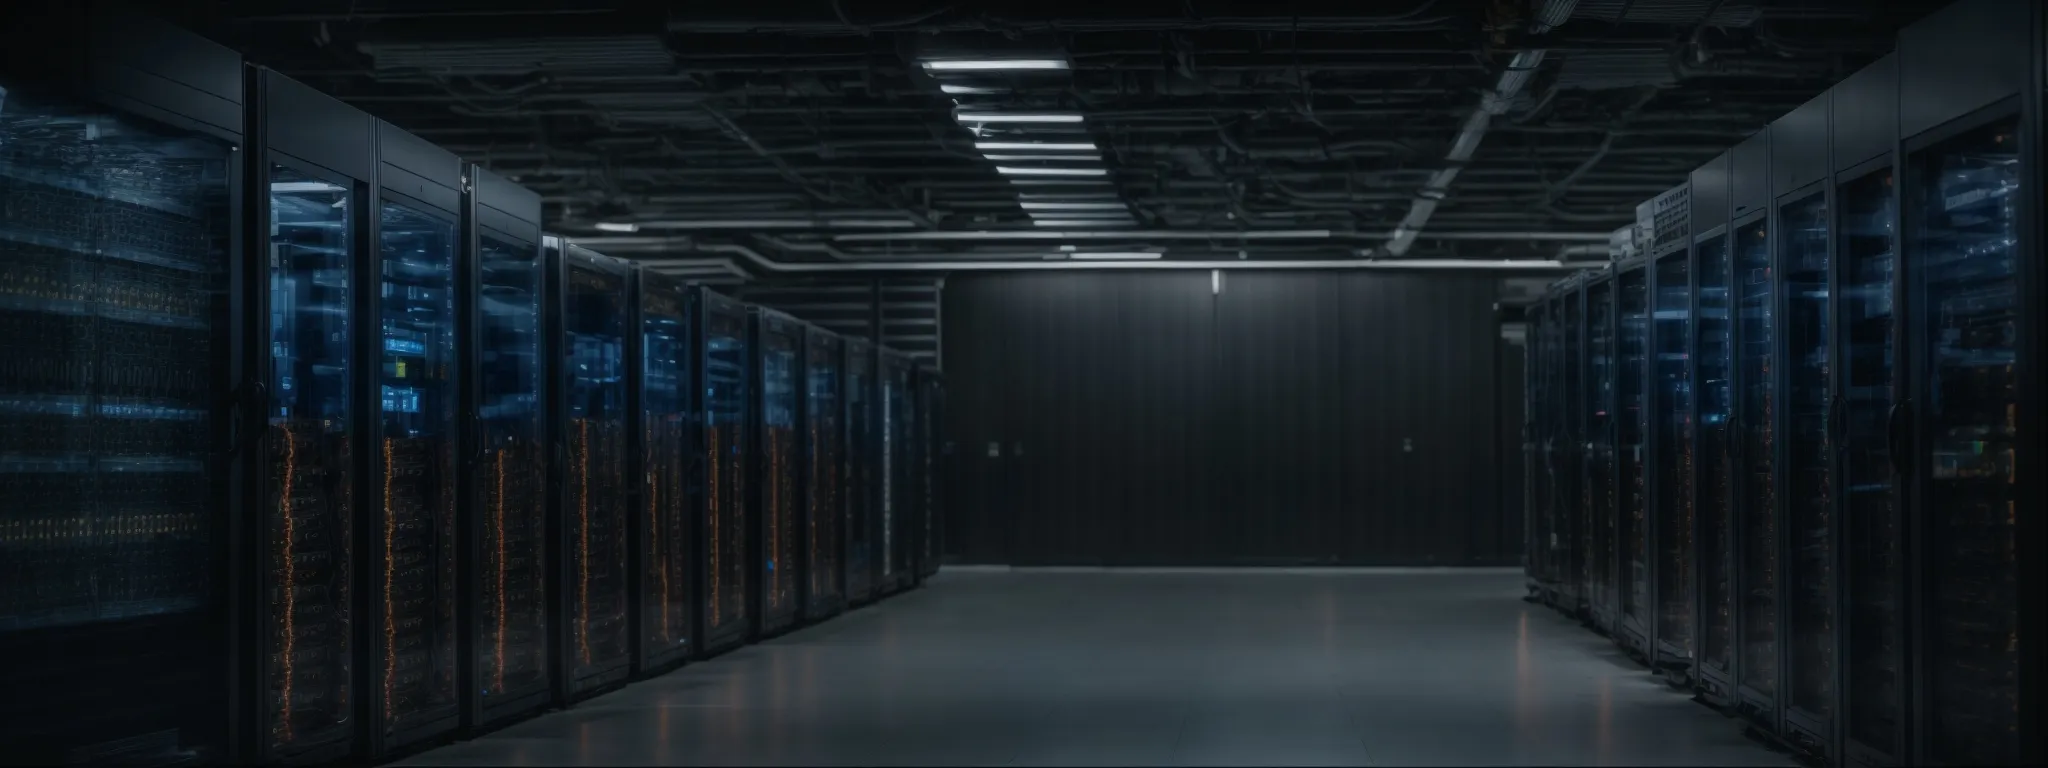 a row of servers indicating a data center that powers a digital knowledge base.